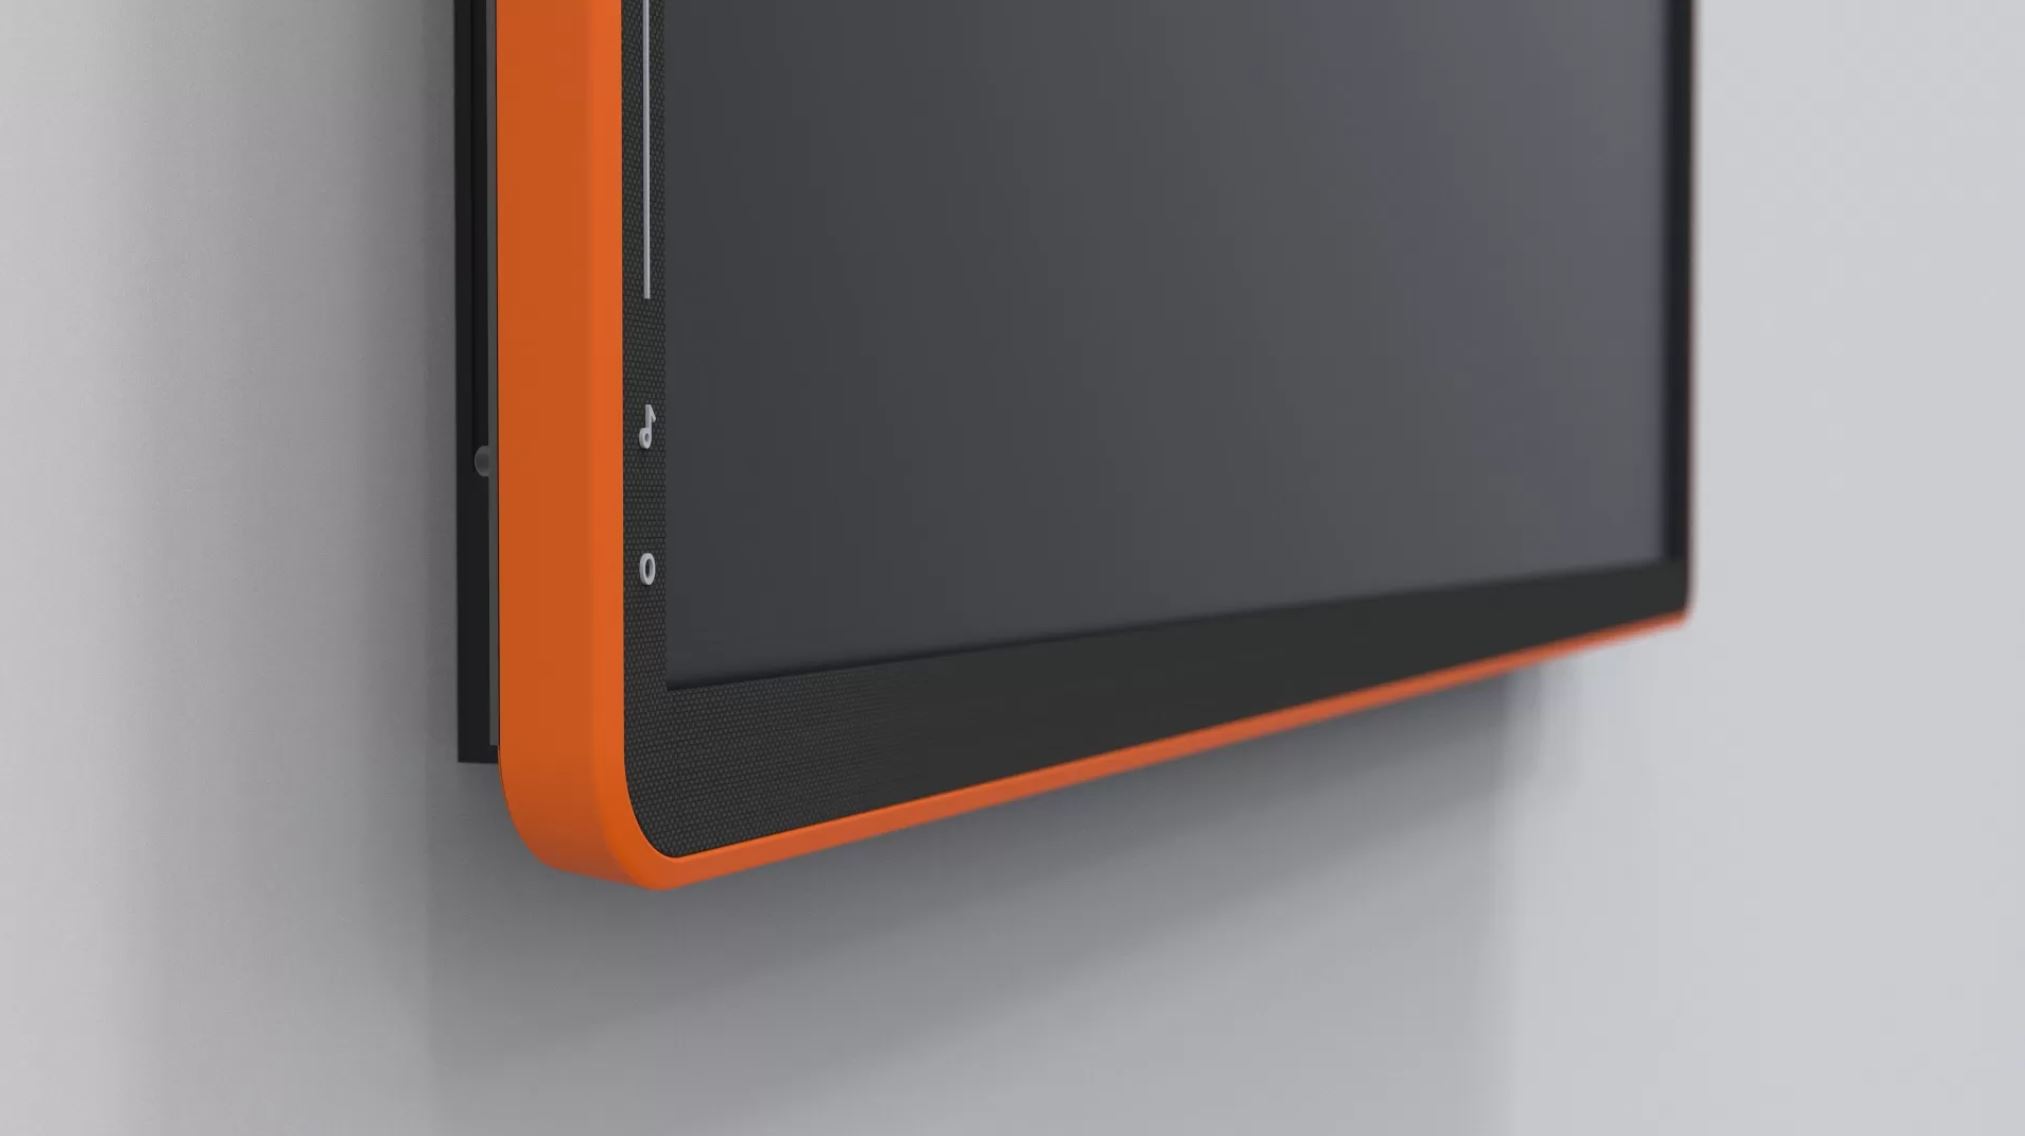 CTOUCH Canvas 65 - Shelf Orange - 65 inch - 350 cd/m² - Ultra HD - 4K - 3840x2160 - NO-OS operating system - 20 point - Touch Display